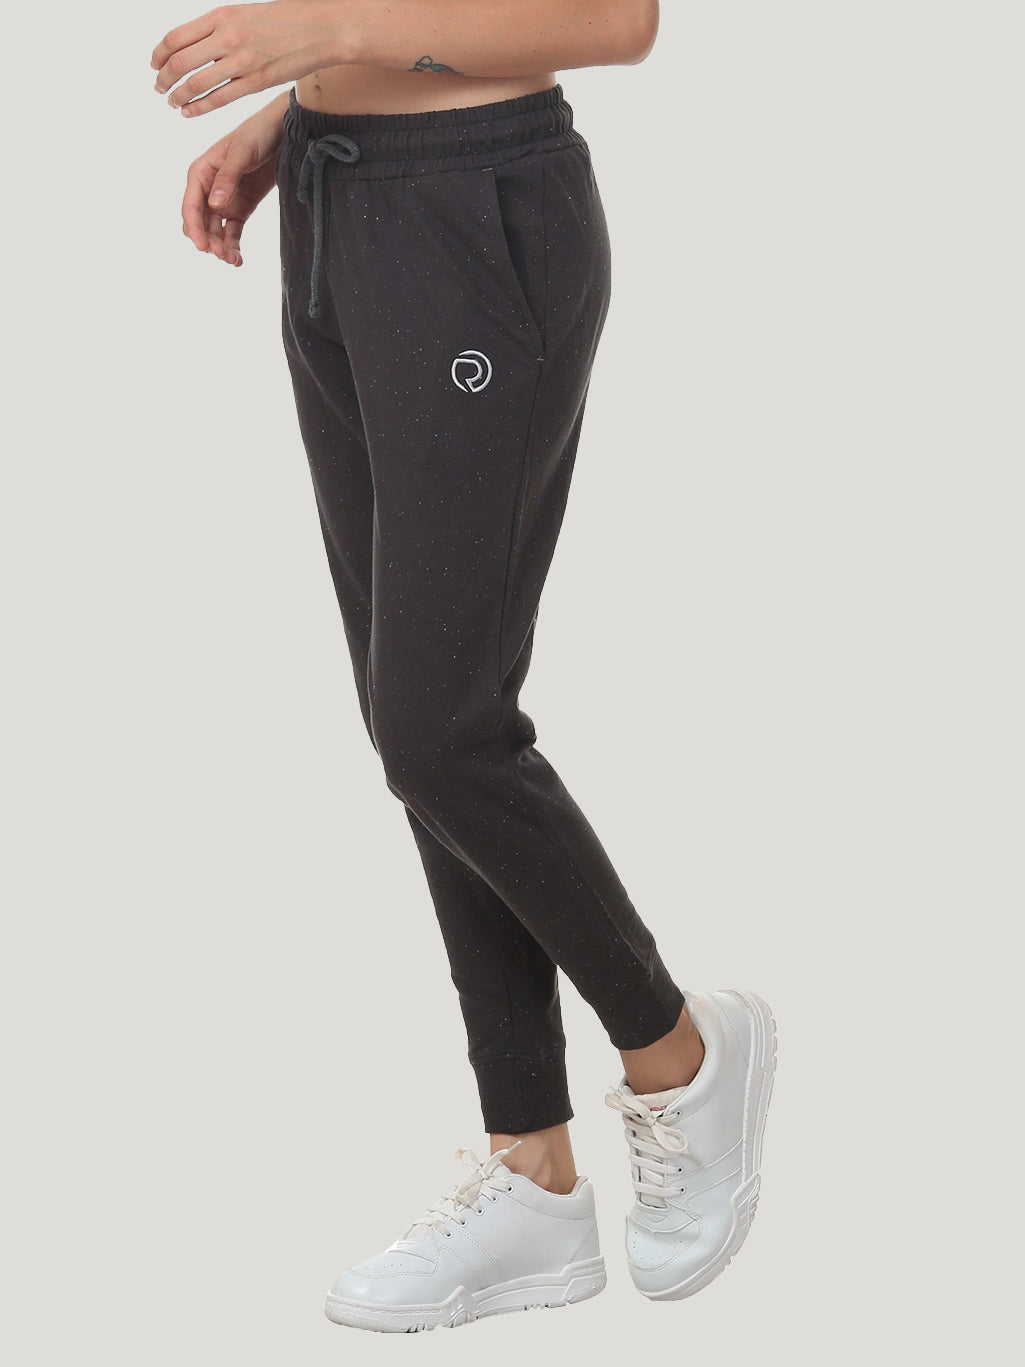 Training & Travel Jogger Pant with 2 Zippered Side Pockets